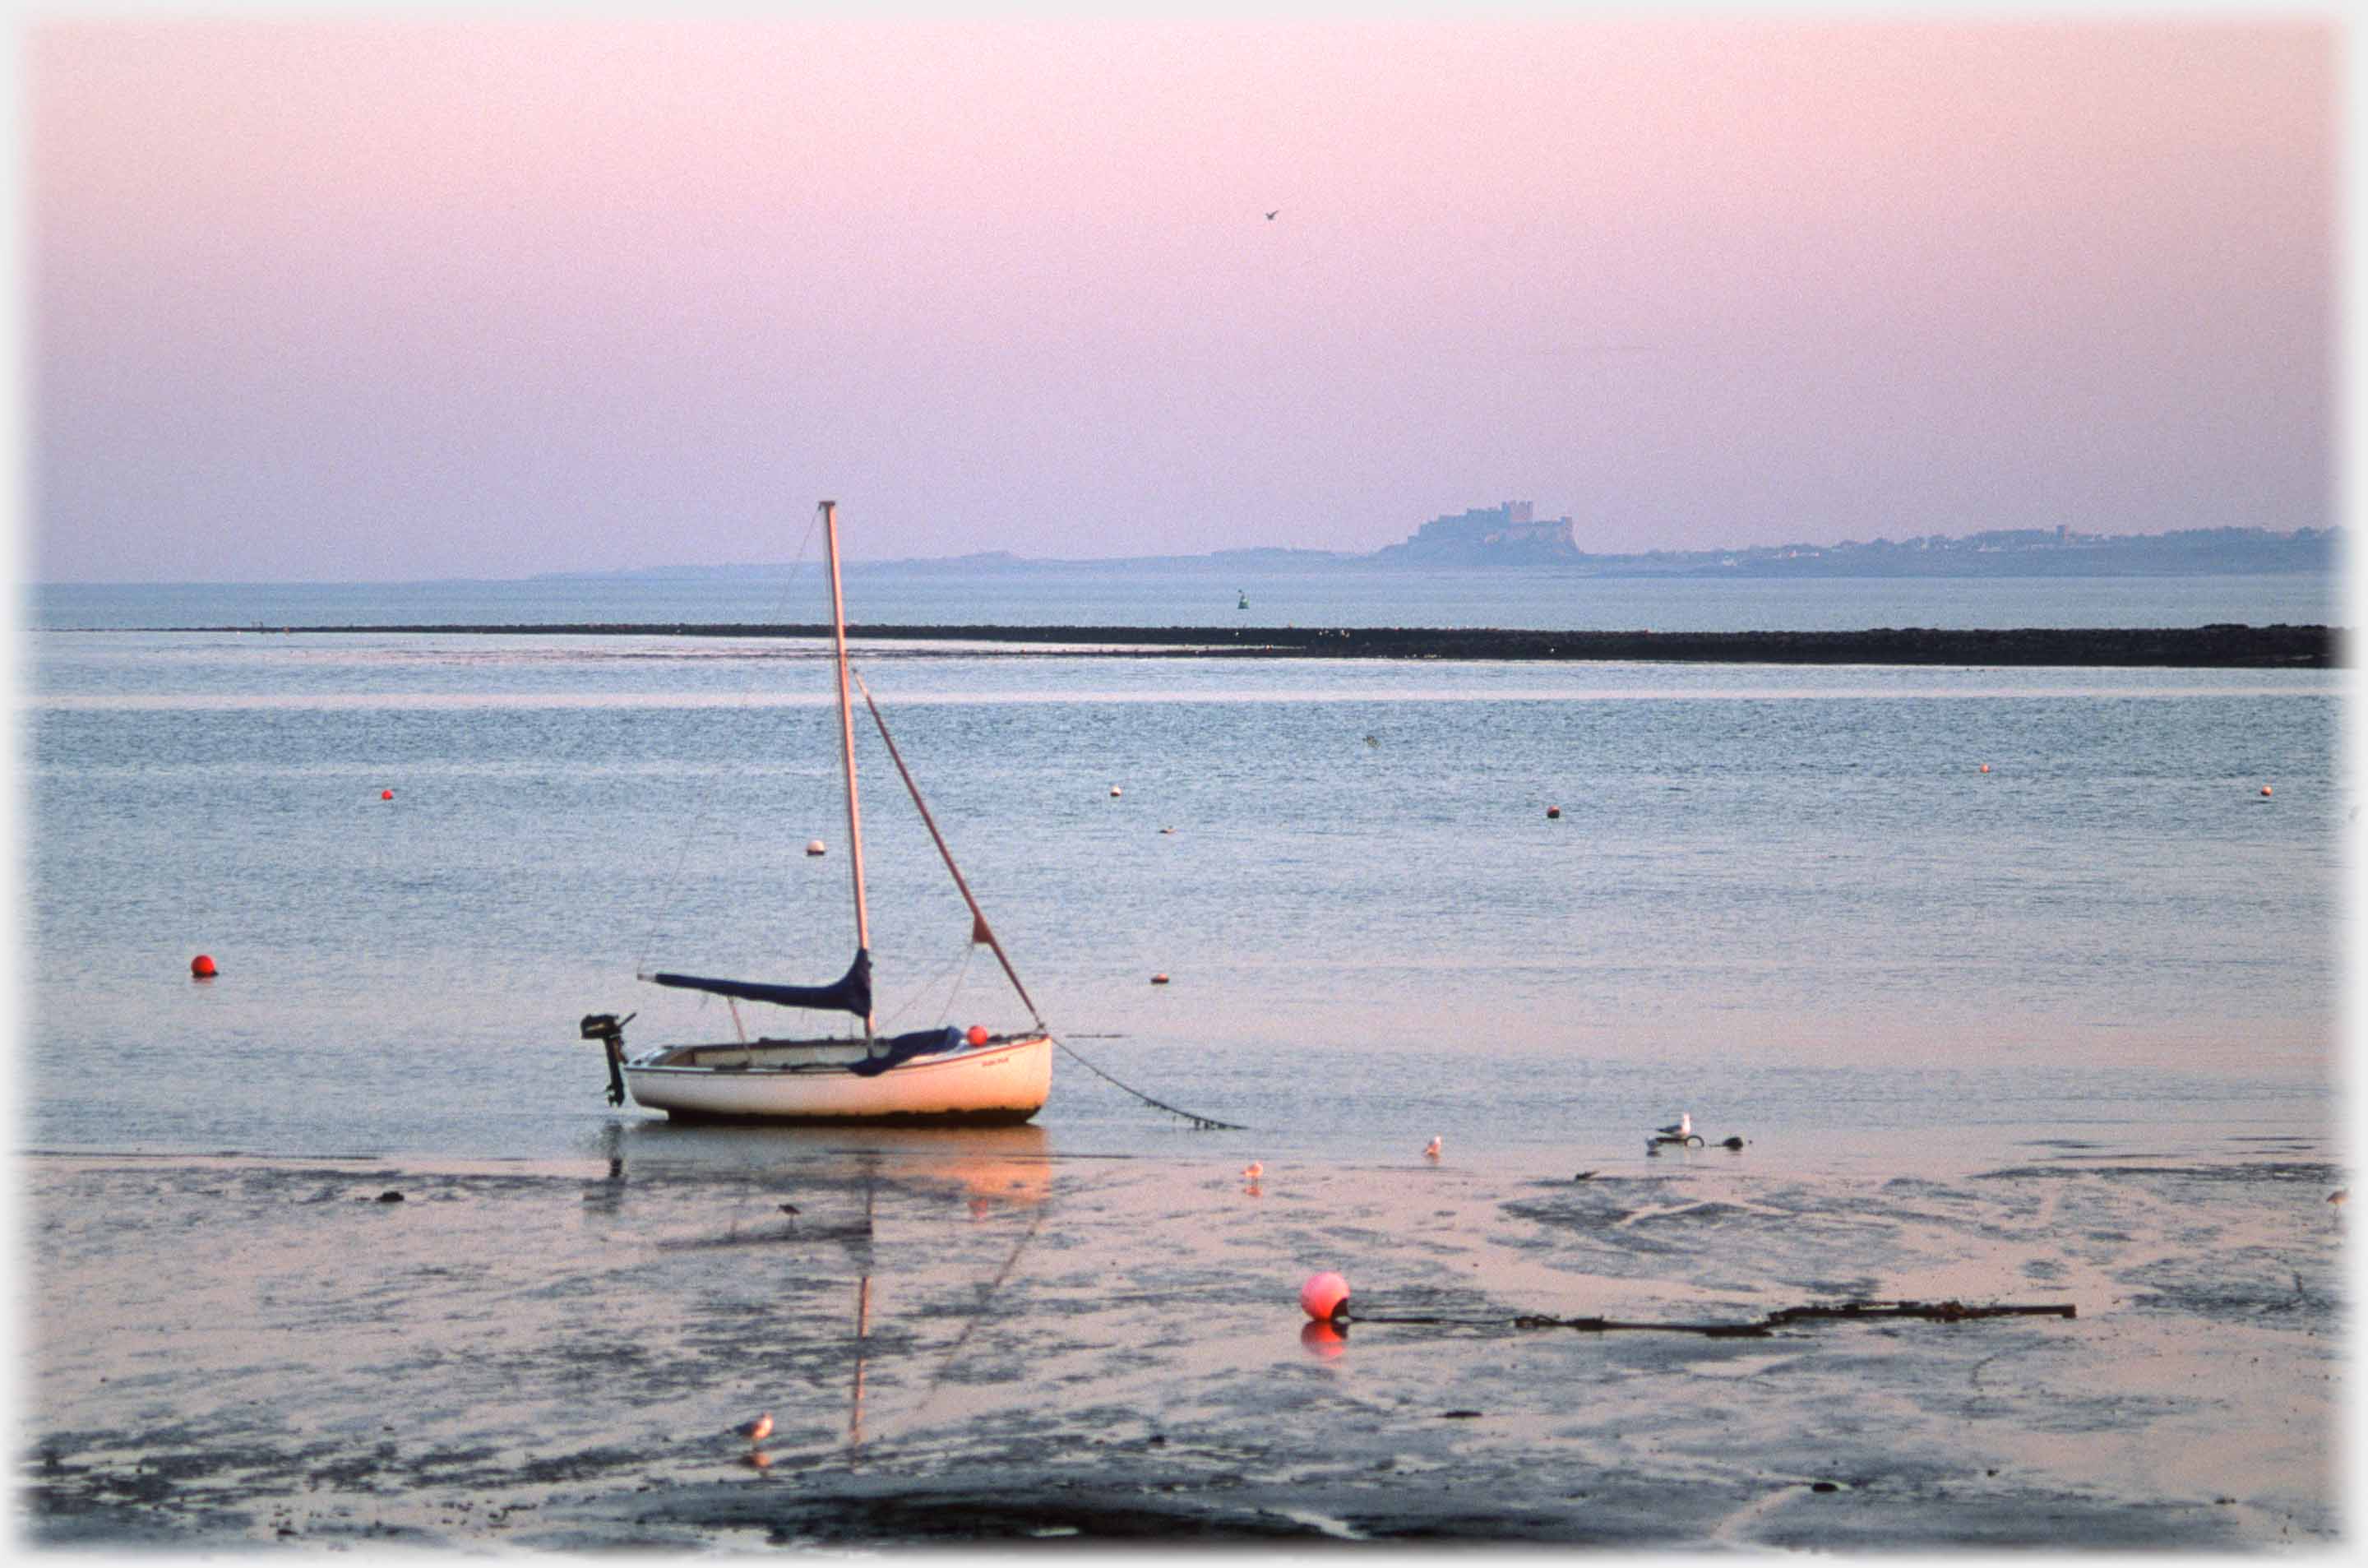 Small dinghy on sand at edge of sea with distant castle.